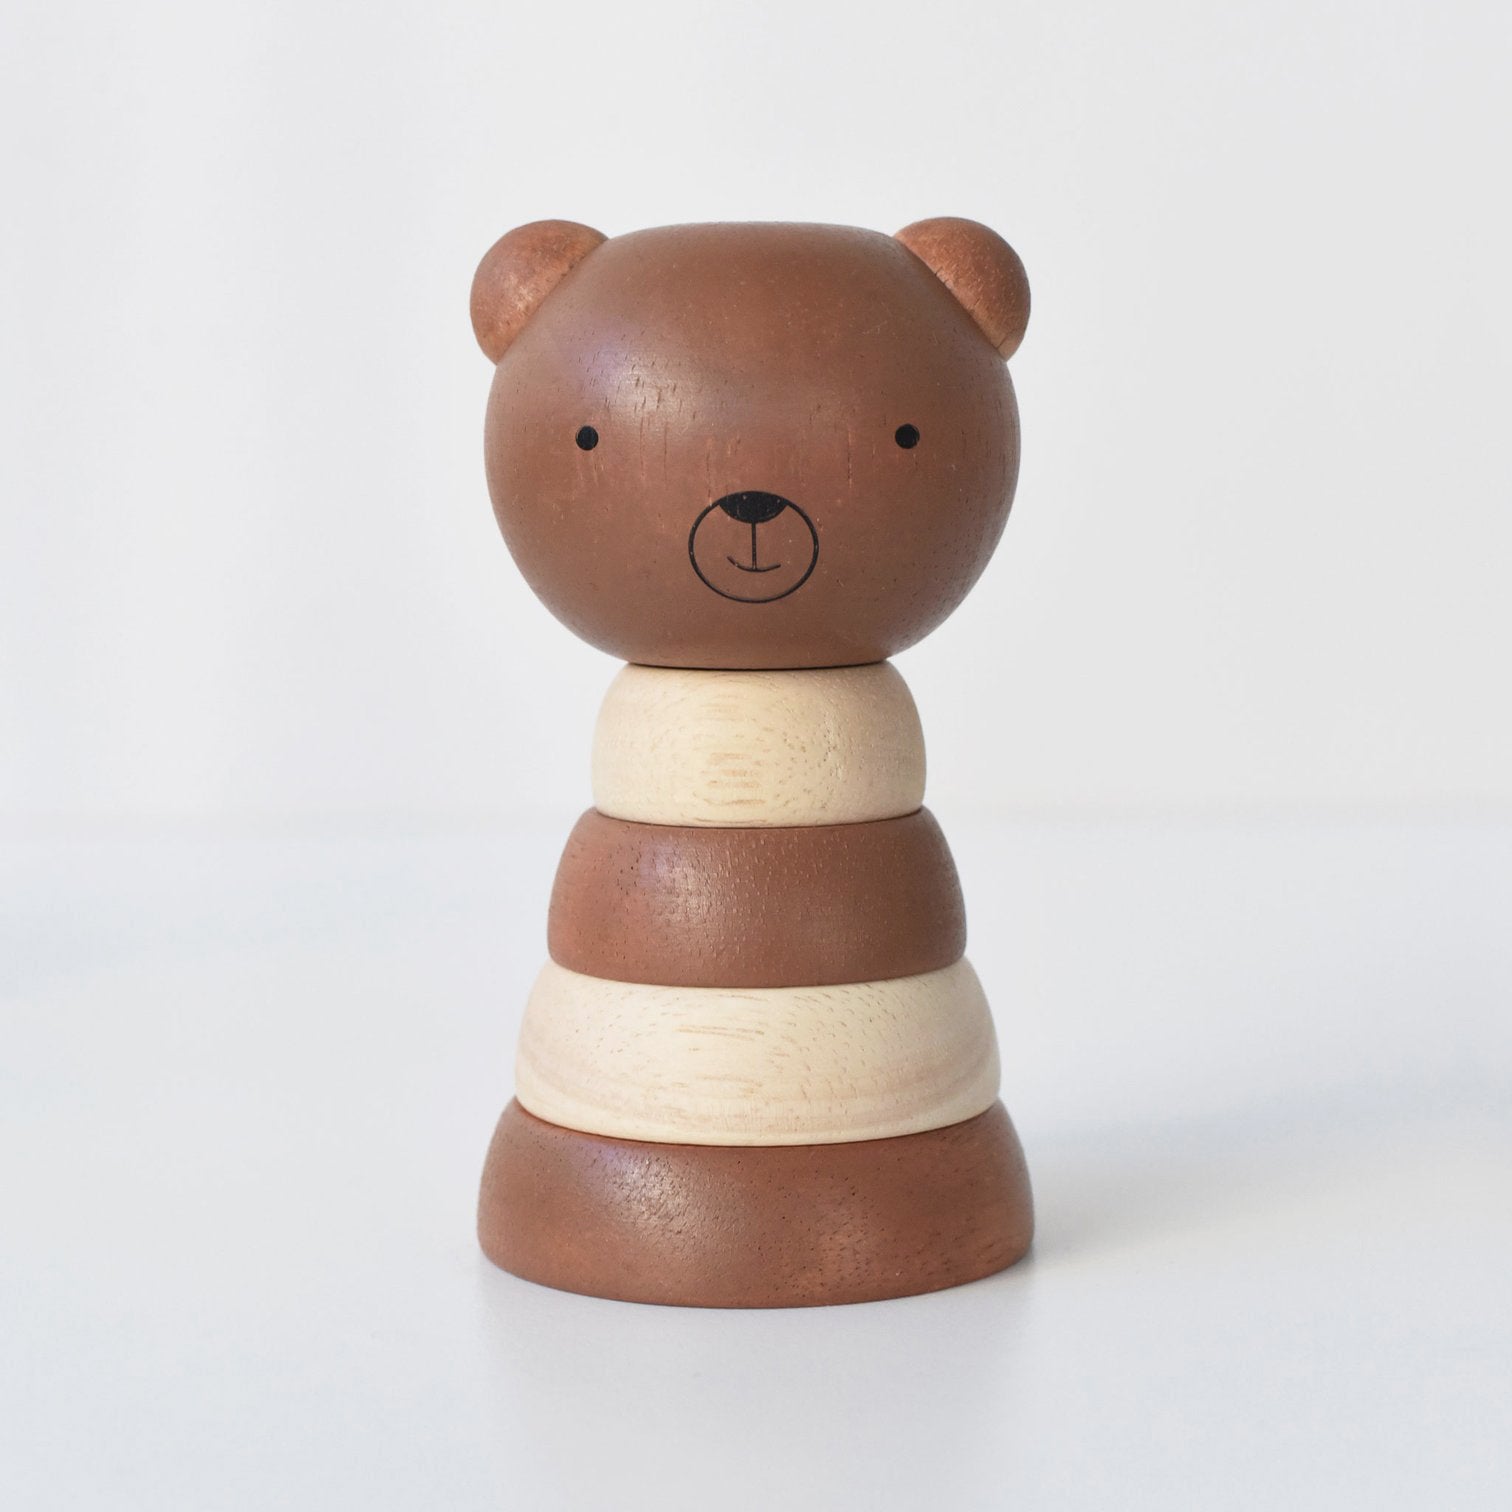 wee-gallery-wooden-toys-bear-stacking-toy-baby-toddler_1512x_de4fa09f-b94f-4d8f-81dd-532b3cadc418.jpg